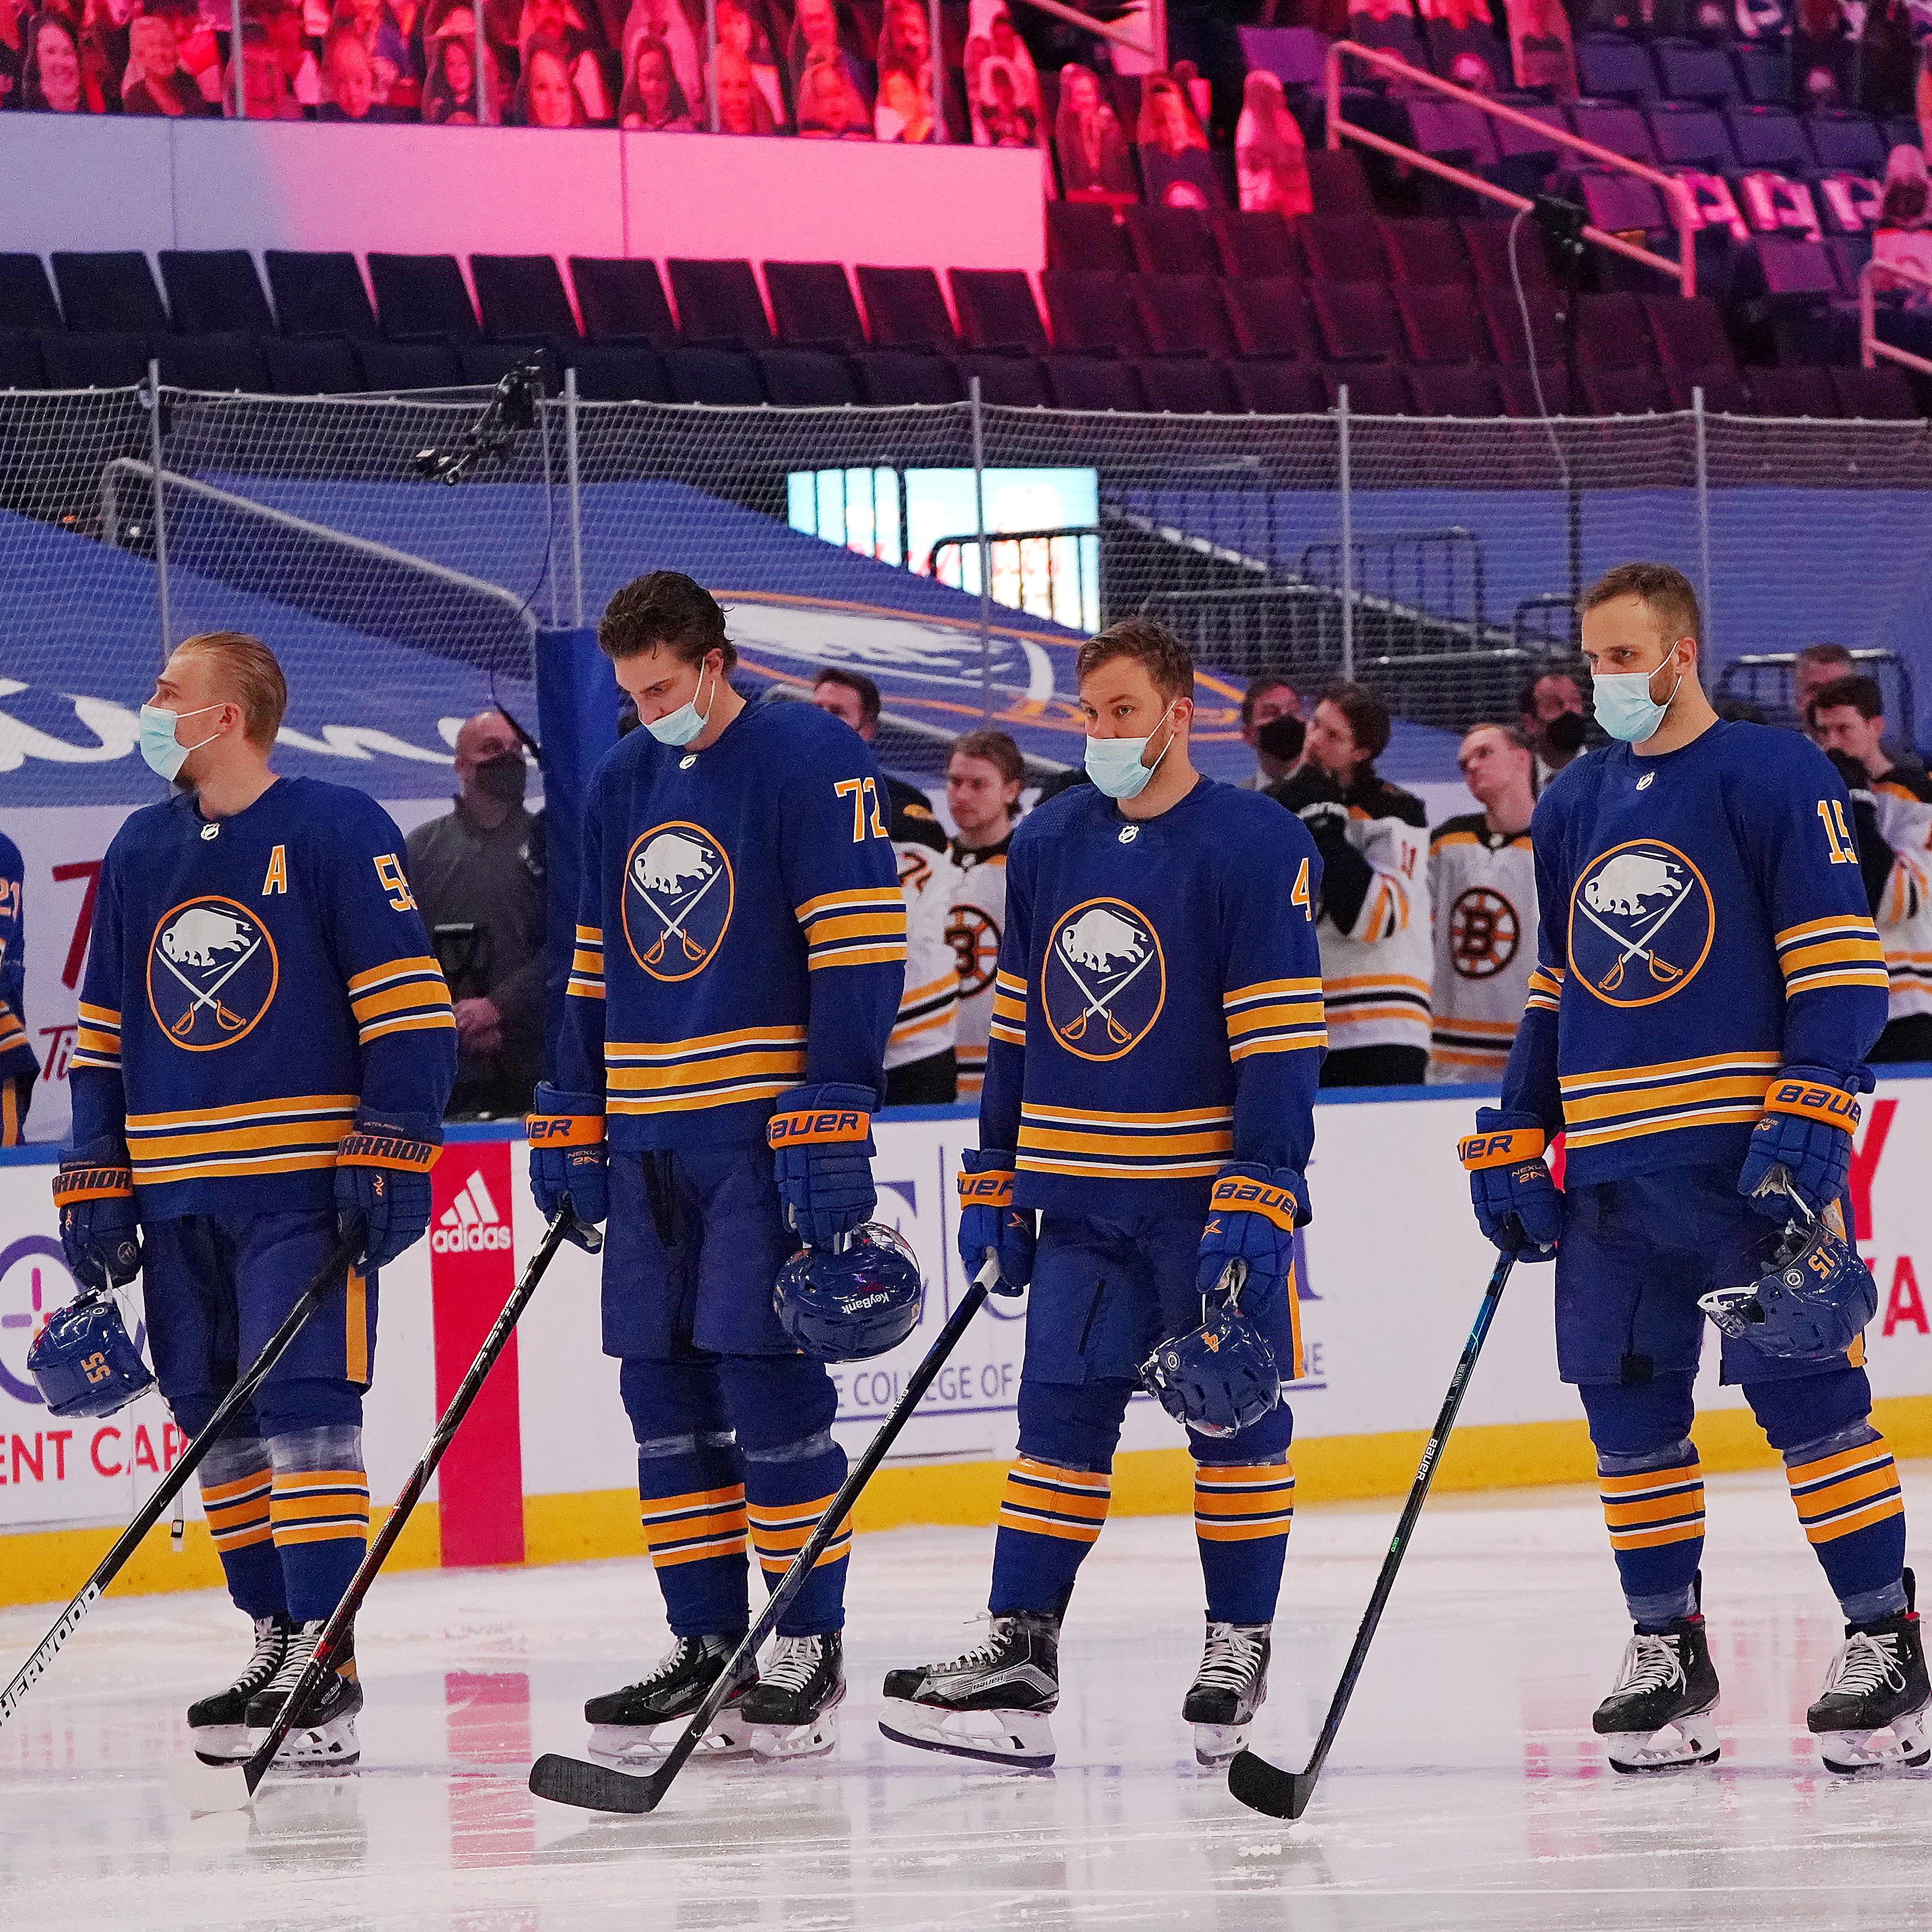 How much progress have the Buffalo Sabres made since December 2021?